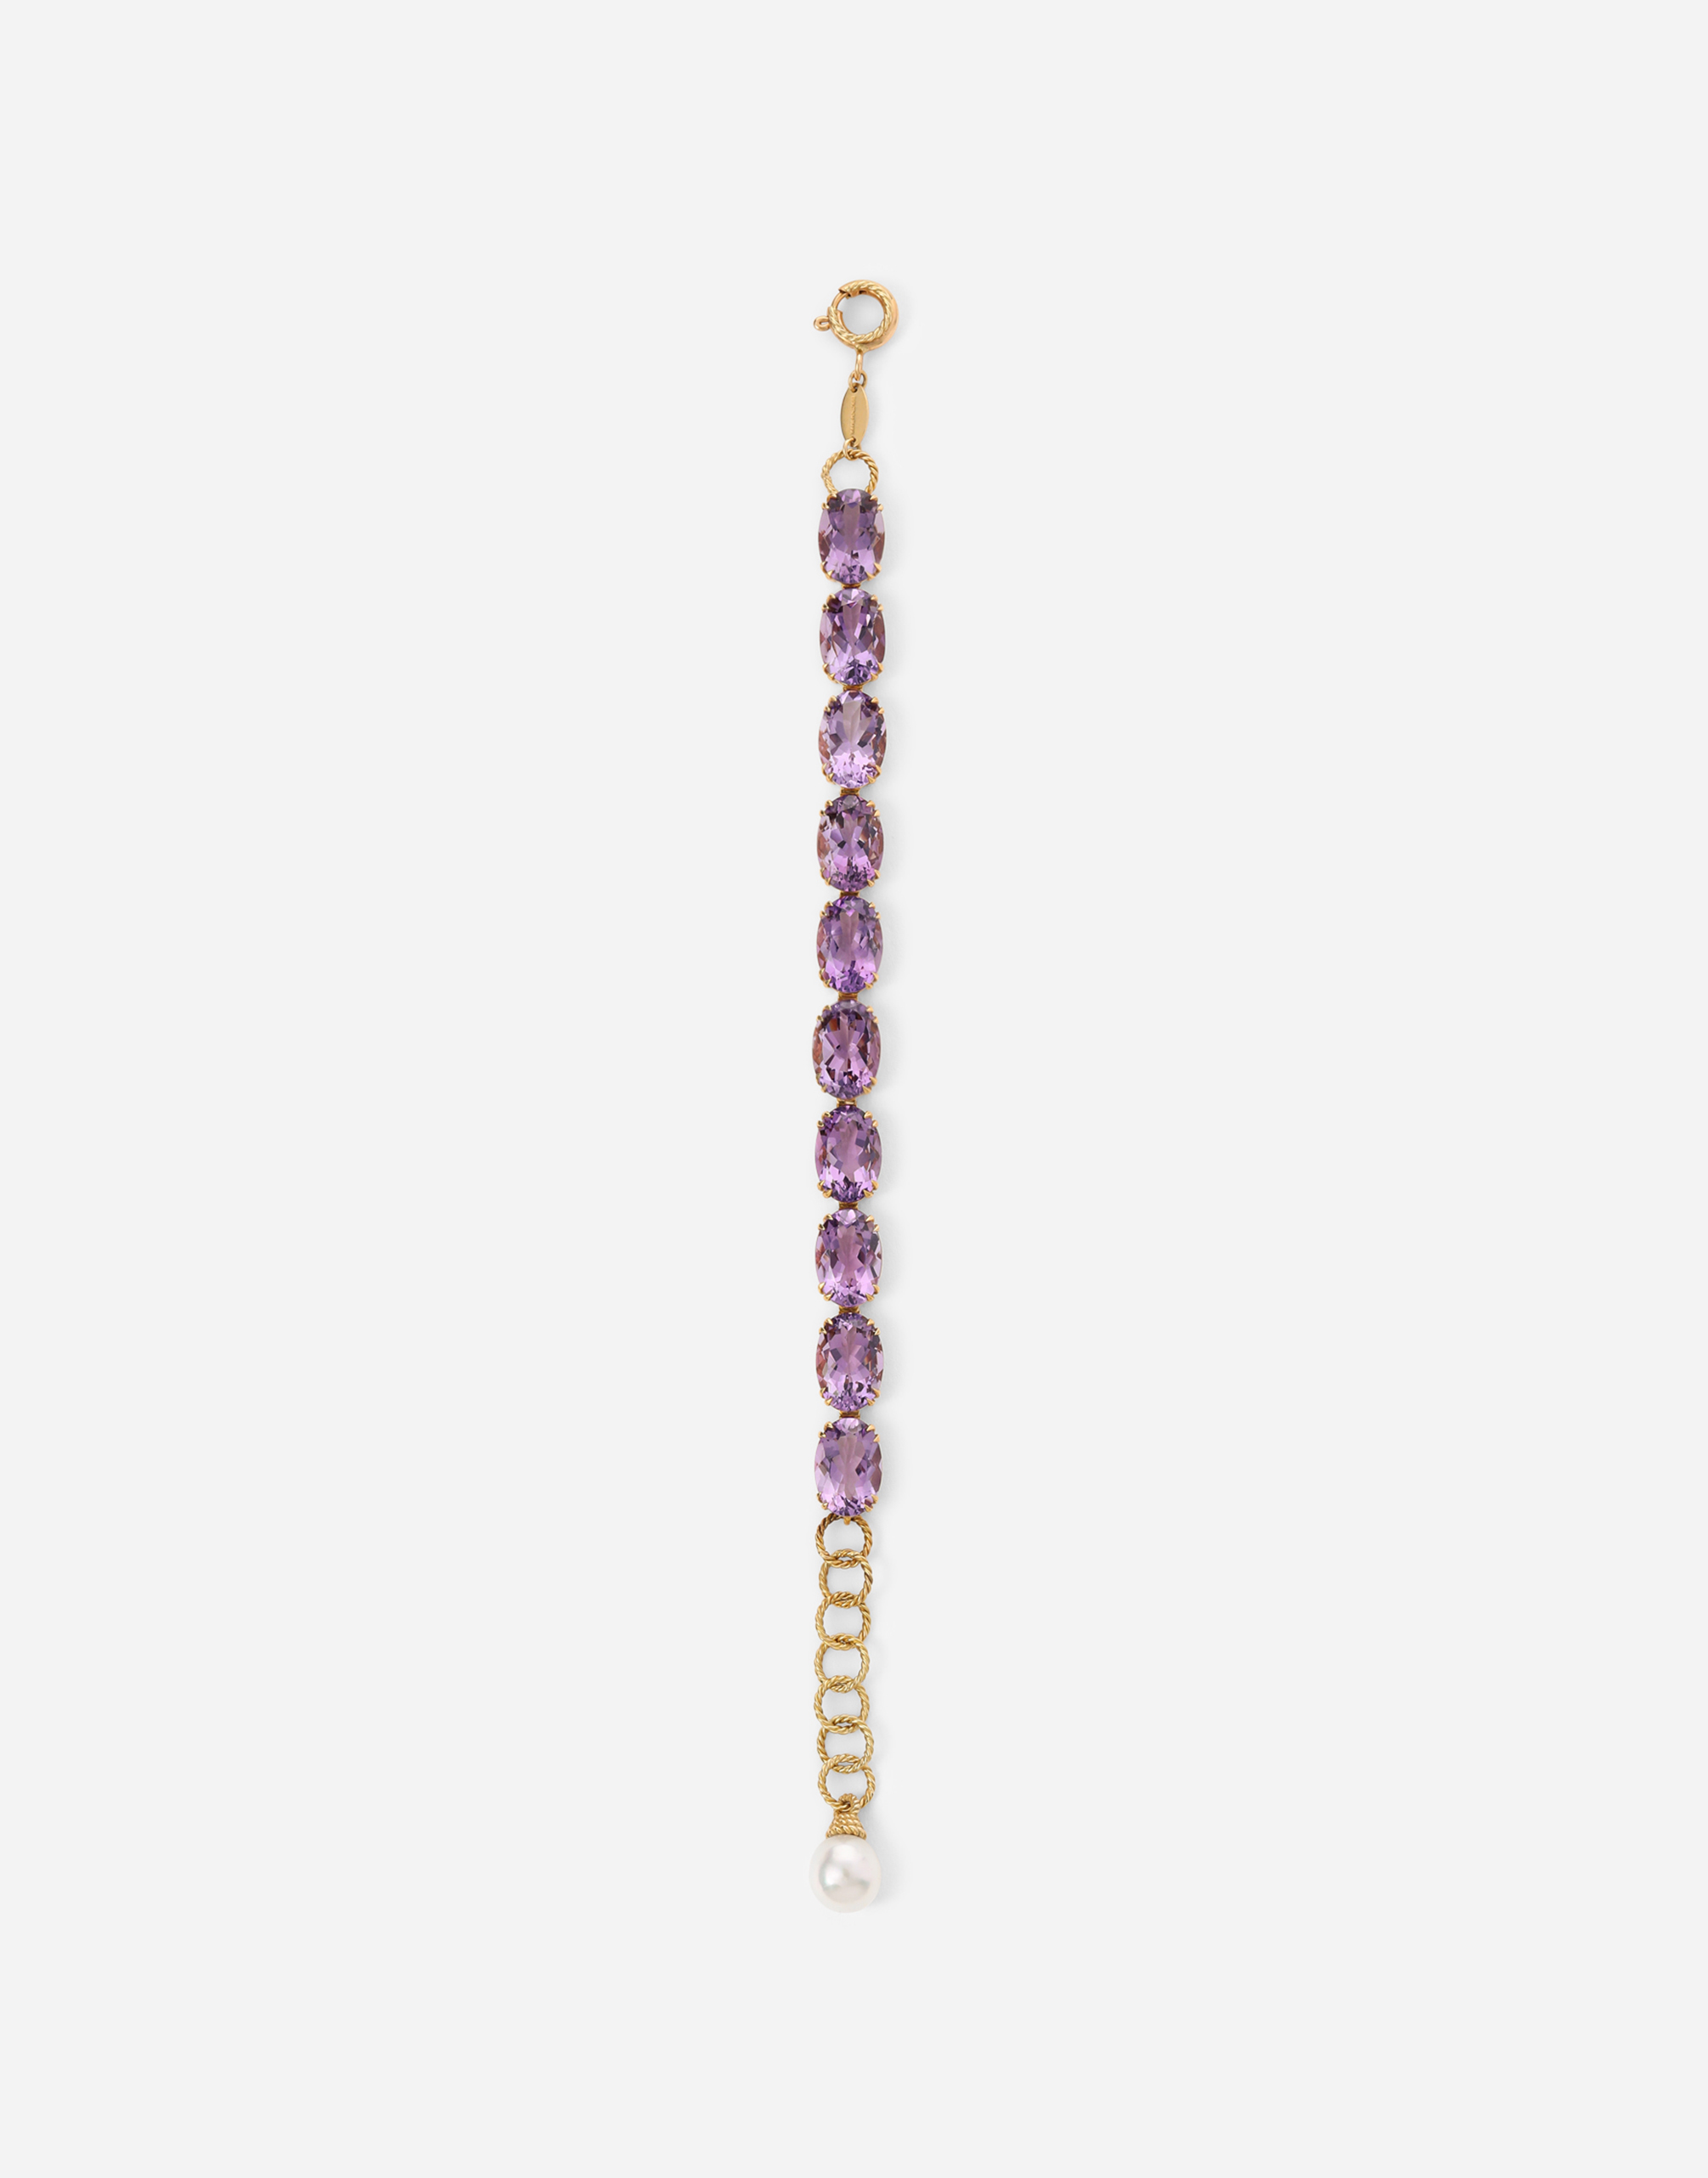 Dolce & Gabbana Anna Bracelet In Yellow 18kt Gold With Amethysts